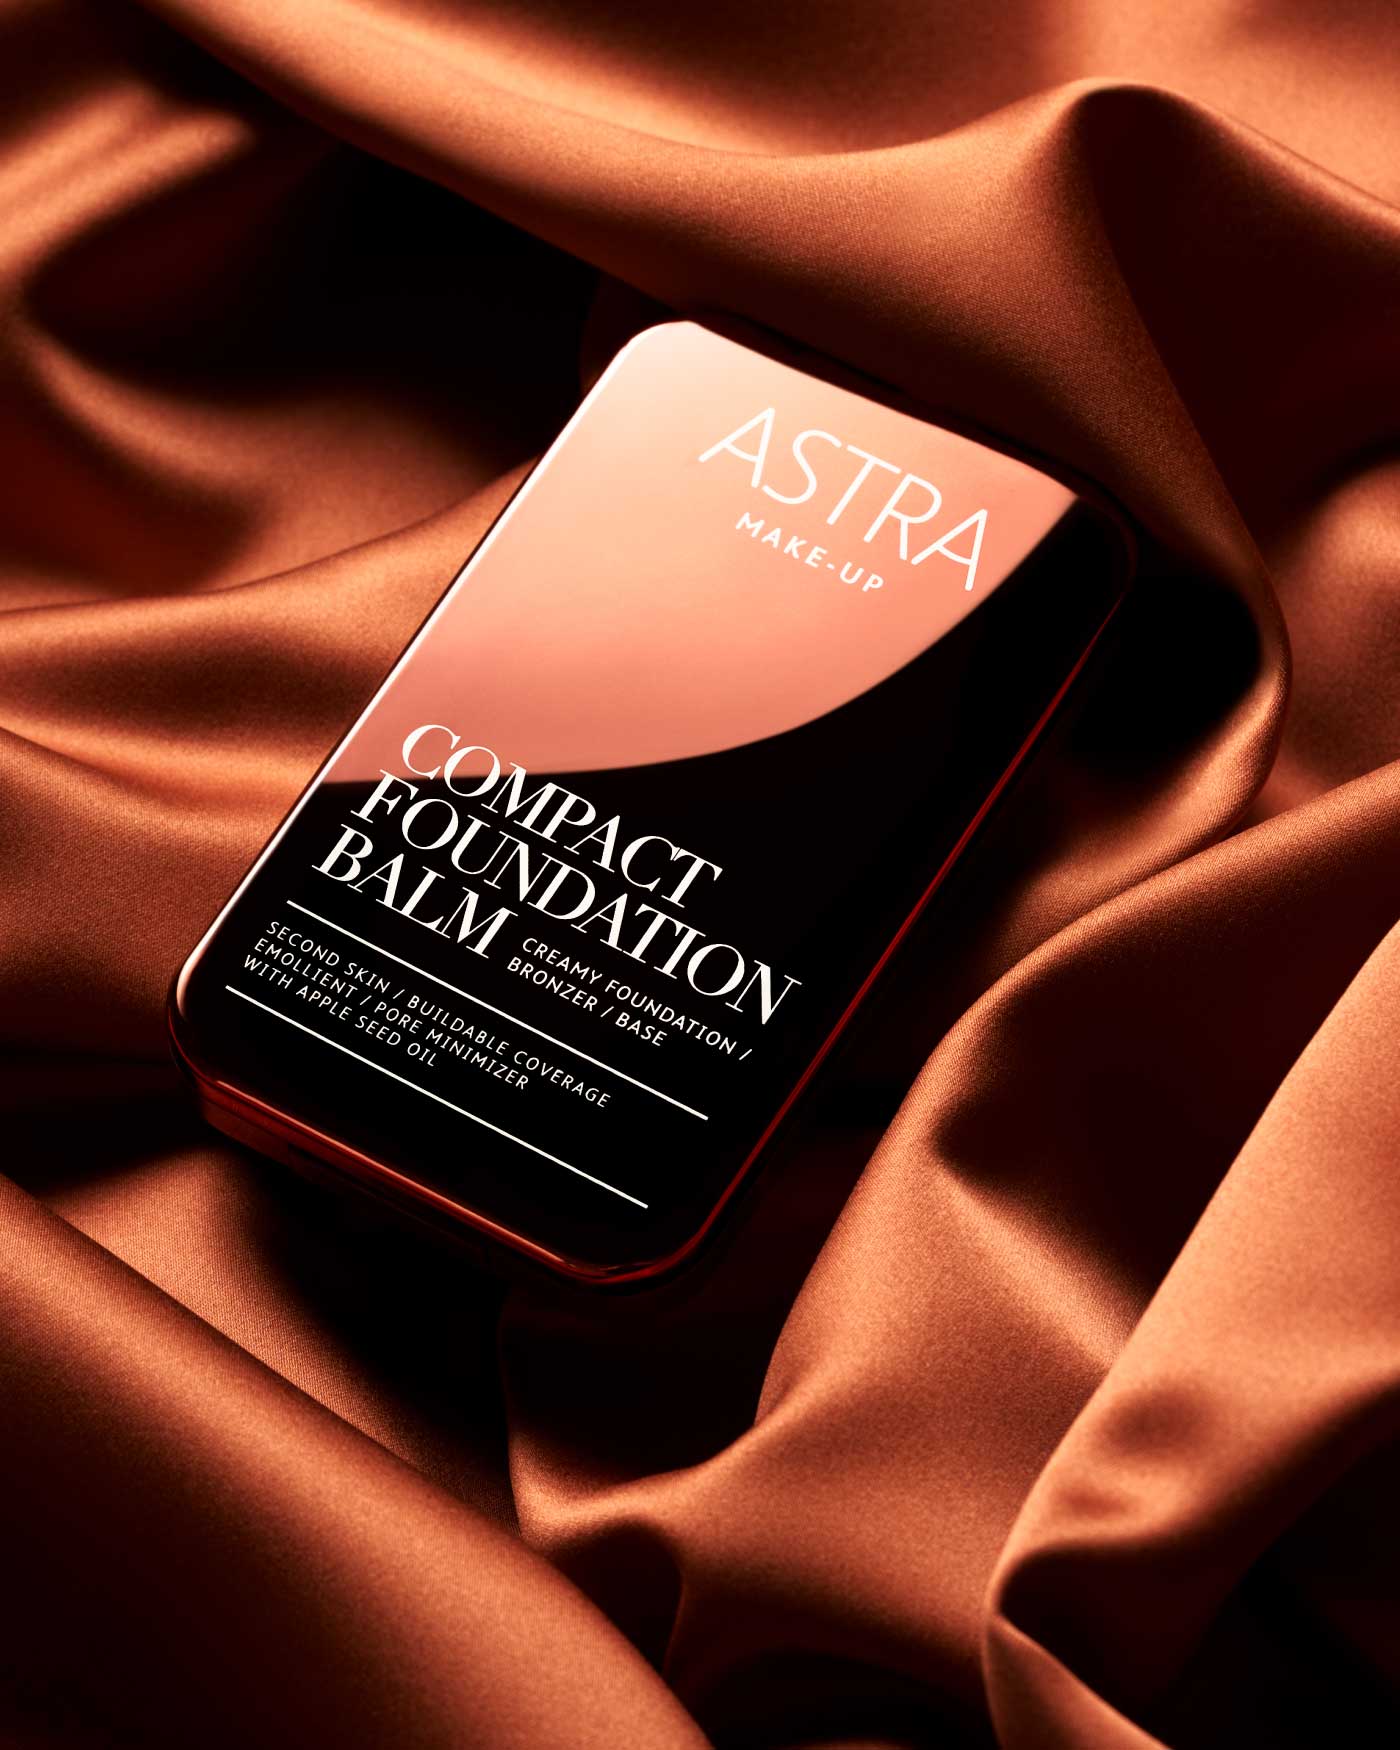 COMPACT FOUNDATION BALM - Best Seller - Astra Make-Up